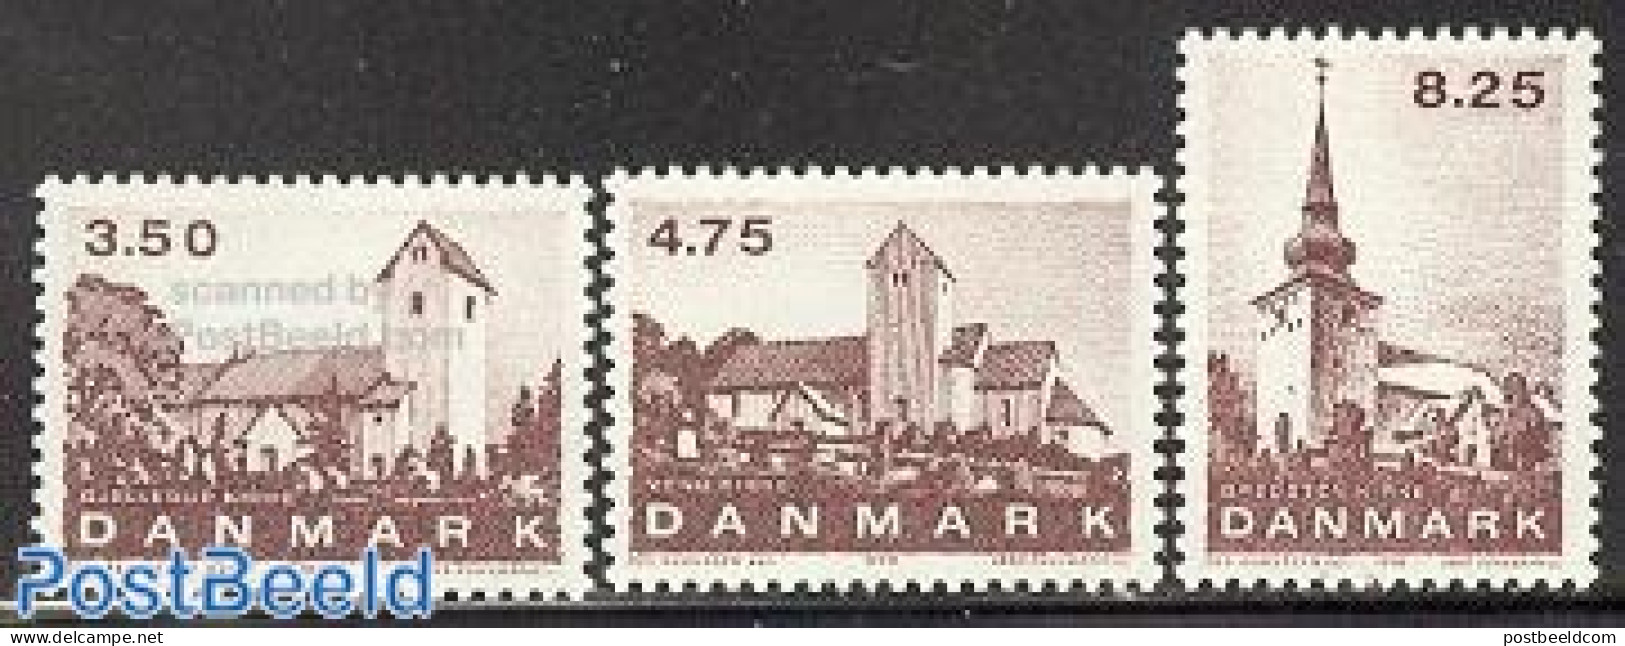 Denmark 1990 Churches 3v, Mint NH, Religion - Churches, Temples, Mosques, Synagogues - Ungebraucht